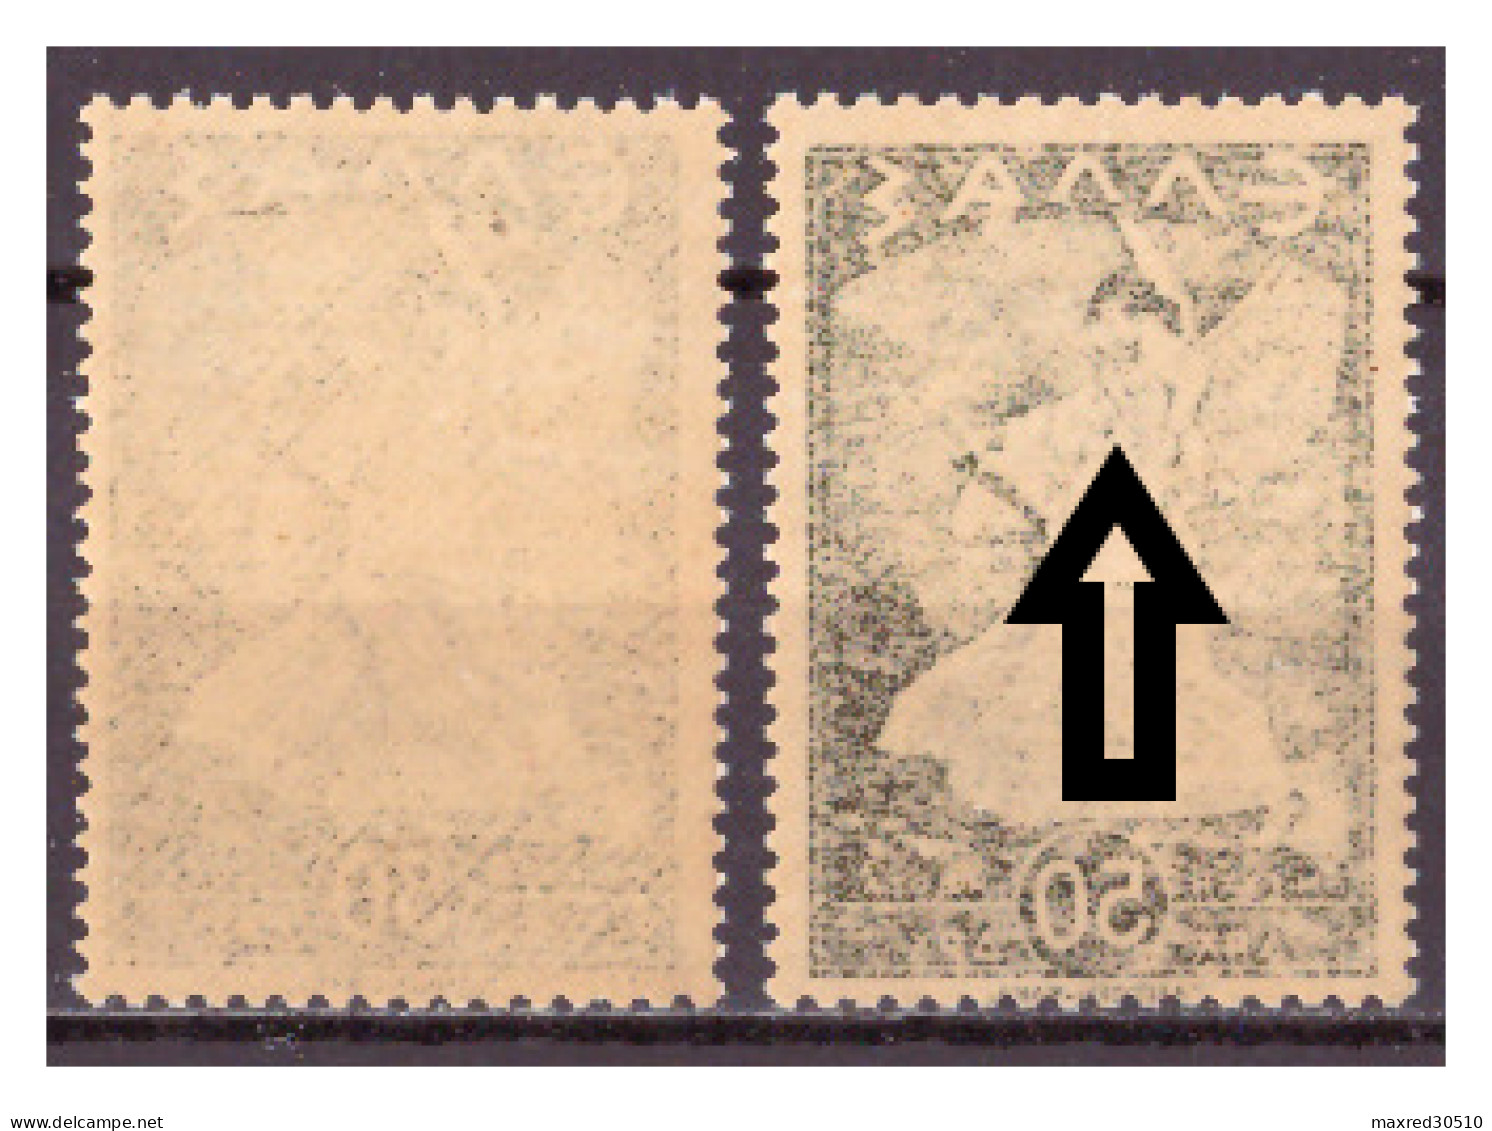 GREECE 1945 2X50L. OF THE "GLORY ISSUE" THE 2ND ONE (SEE ARROWS) WITH MIRROR PRINTING AT THE GUM ERROR MNH - Errors, Freaks & Oddities (EFO)